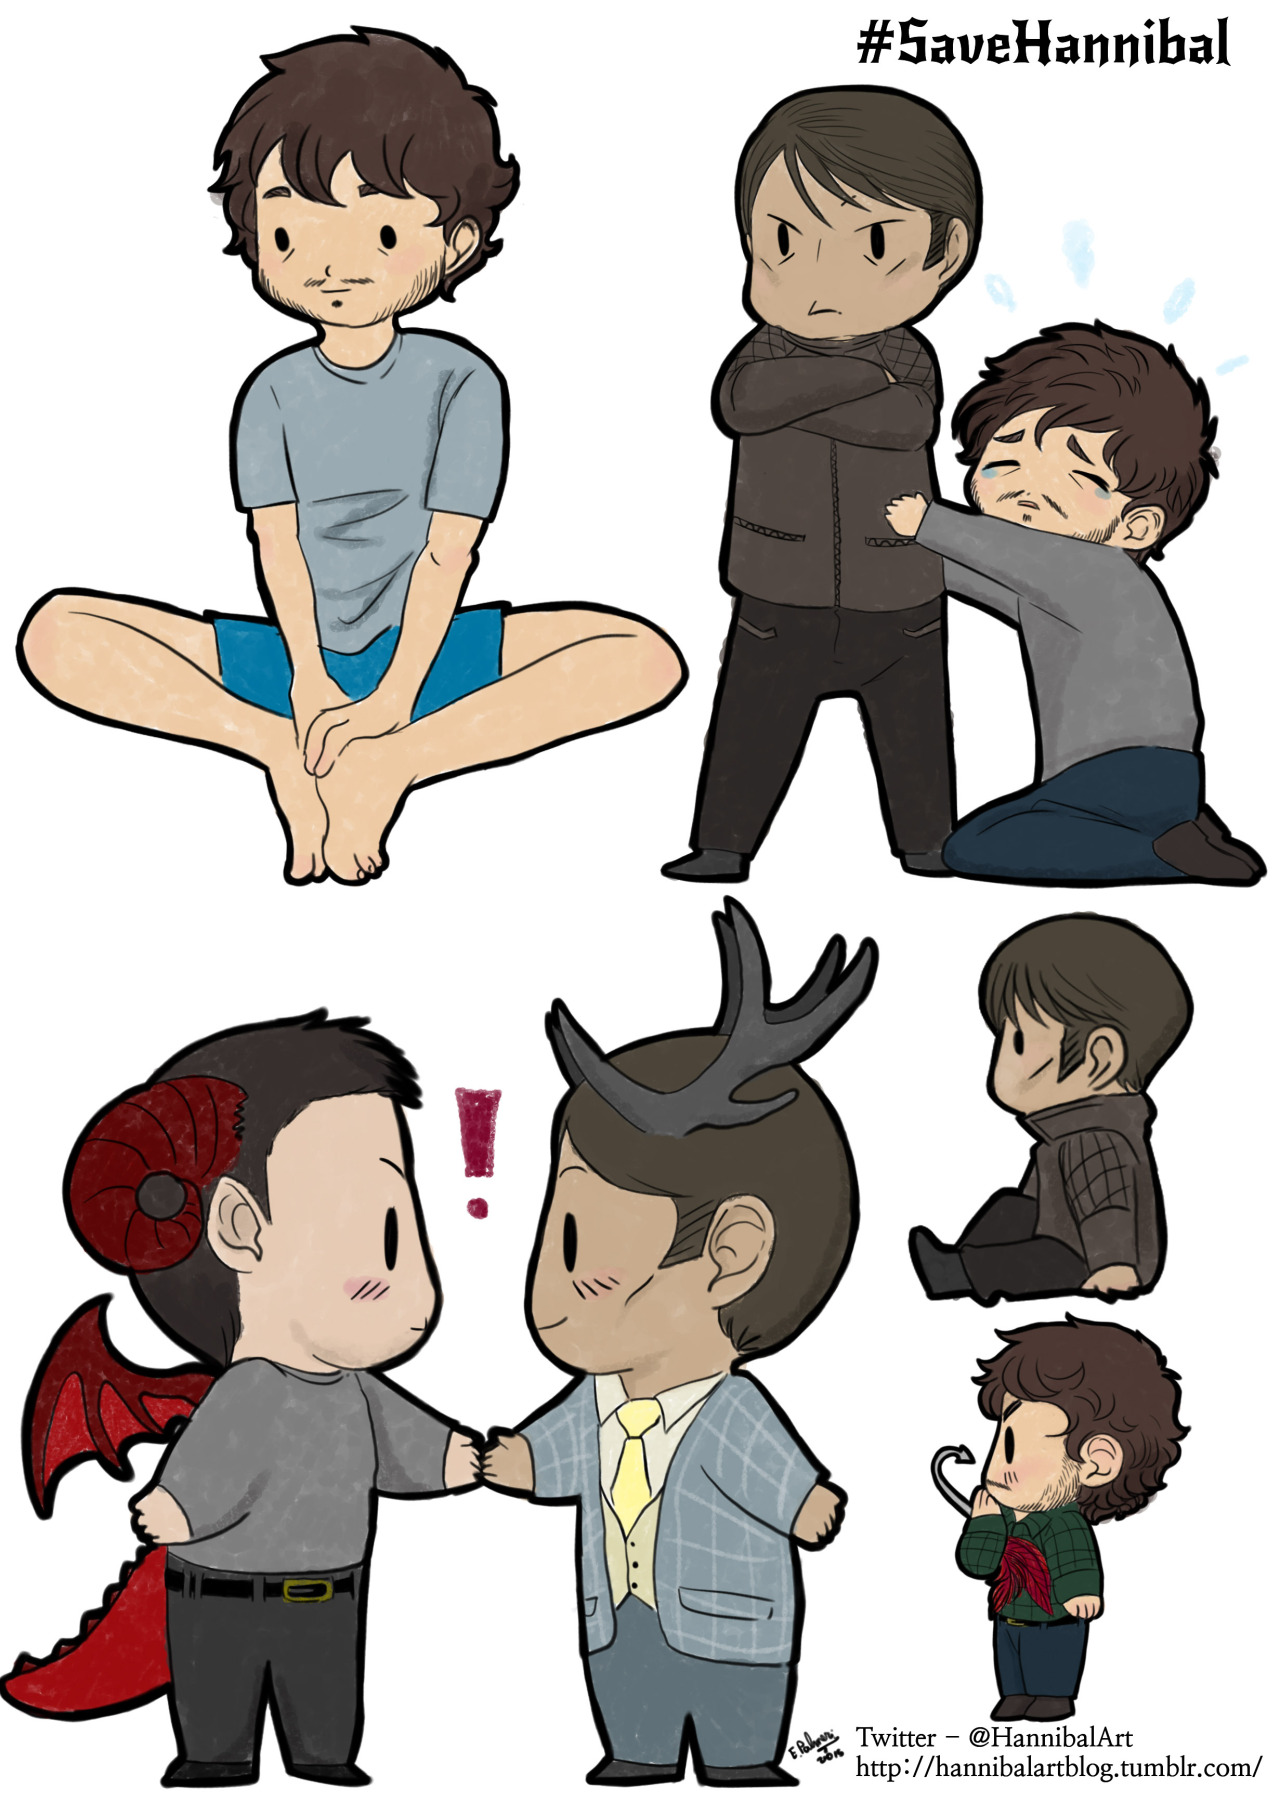 http://ohshit-kxgrape-draws.tumblr.com/post/126946170714/aw-yis-i-did-the-fannibalcoloringbook-it-was